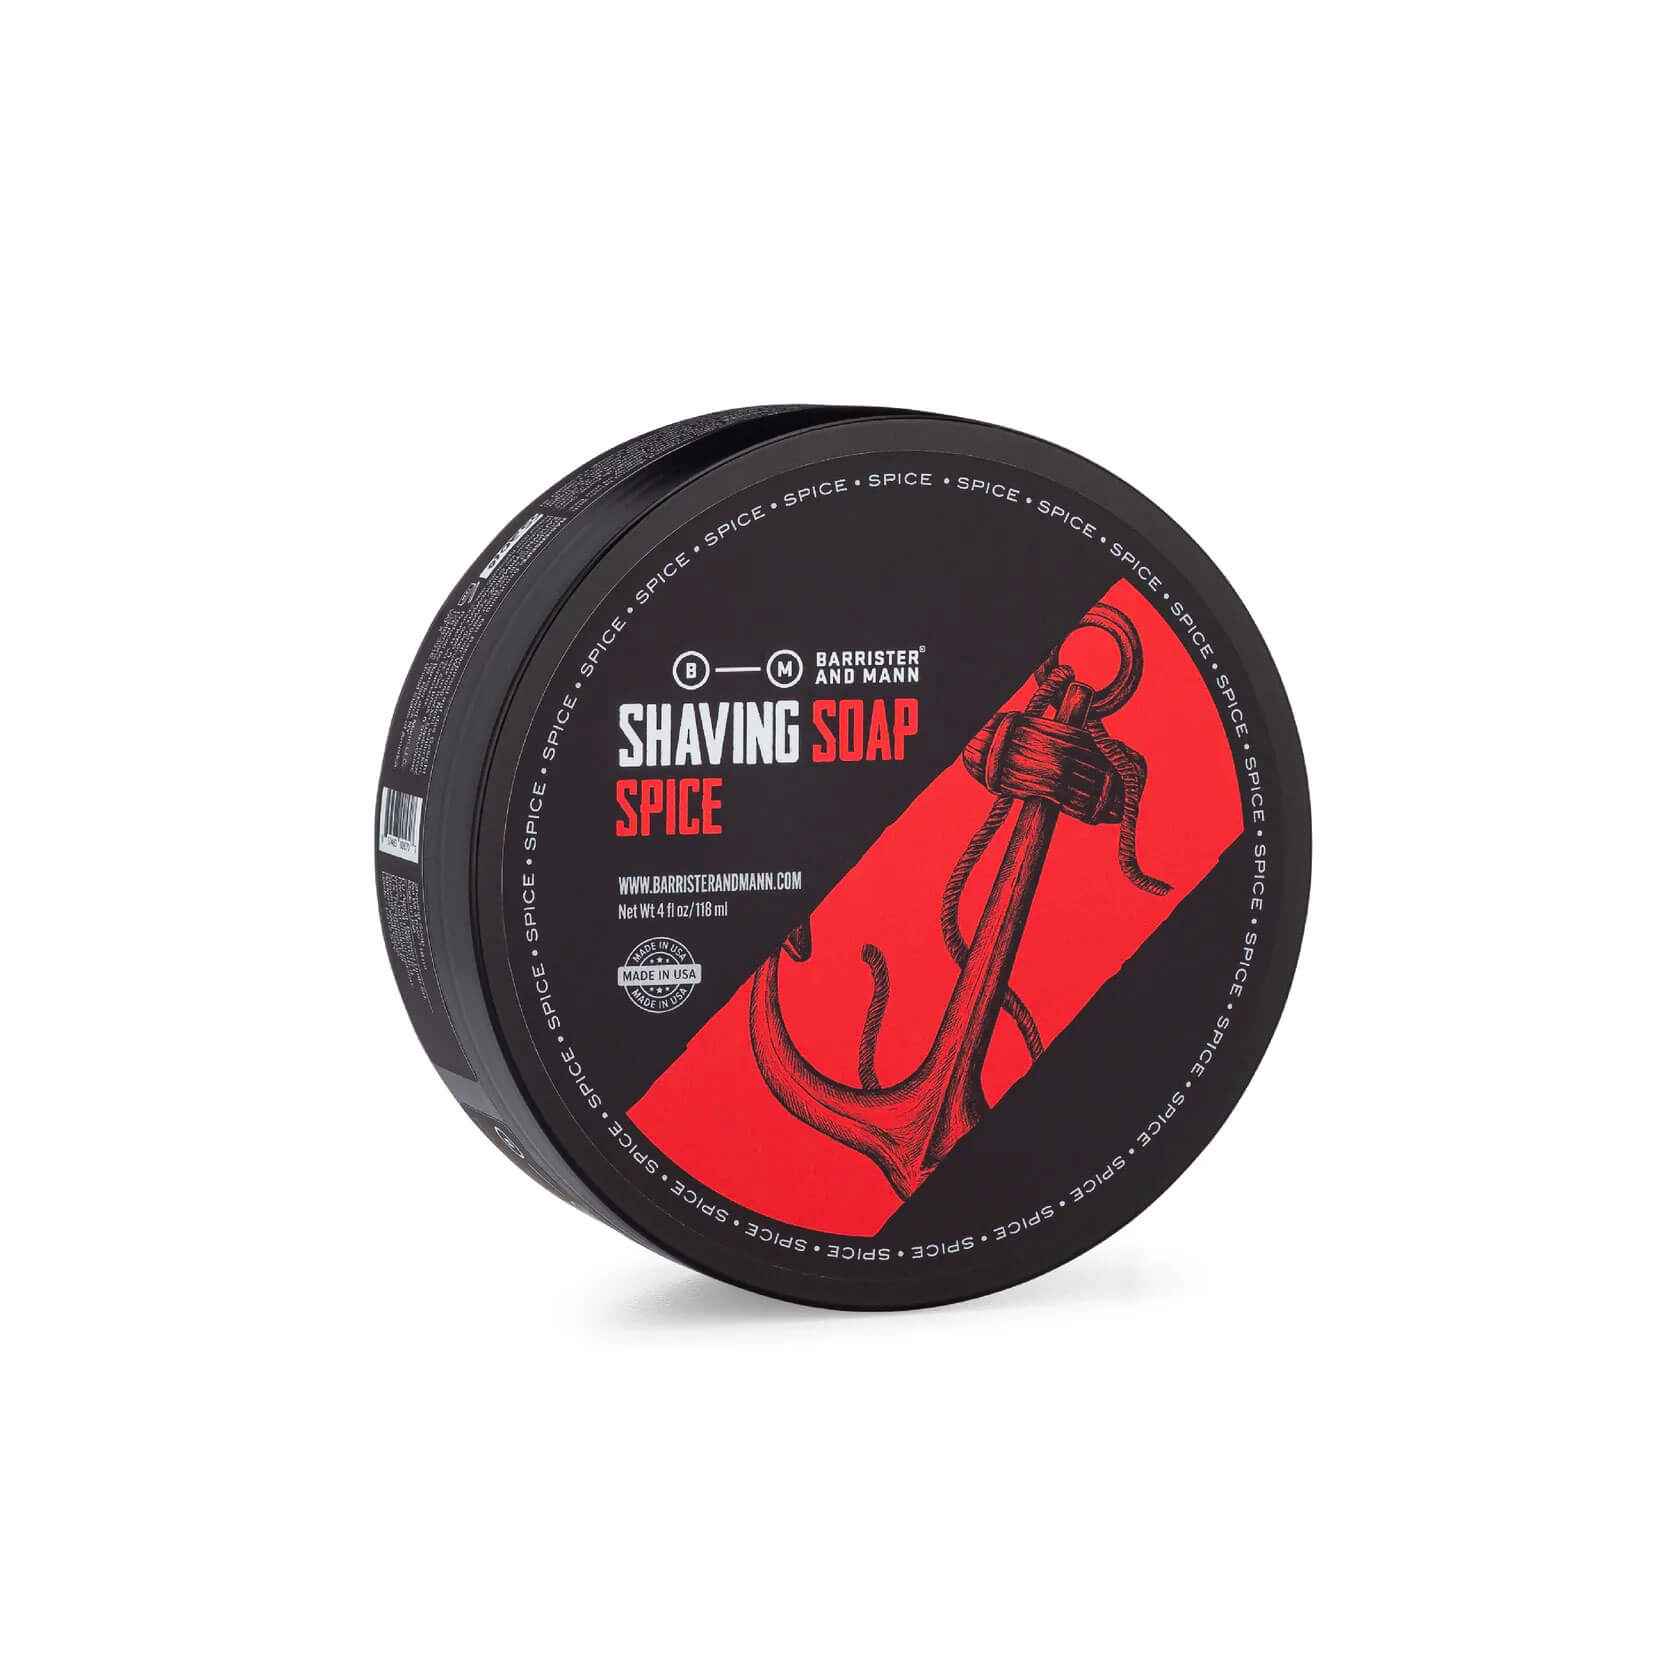 Barrister and Mann Spice Shaving Soap